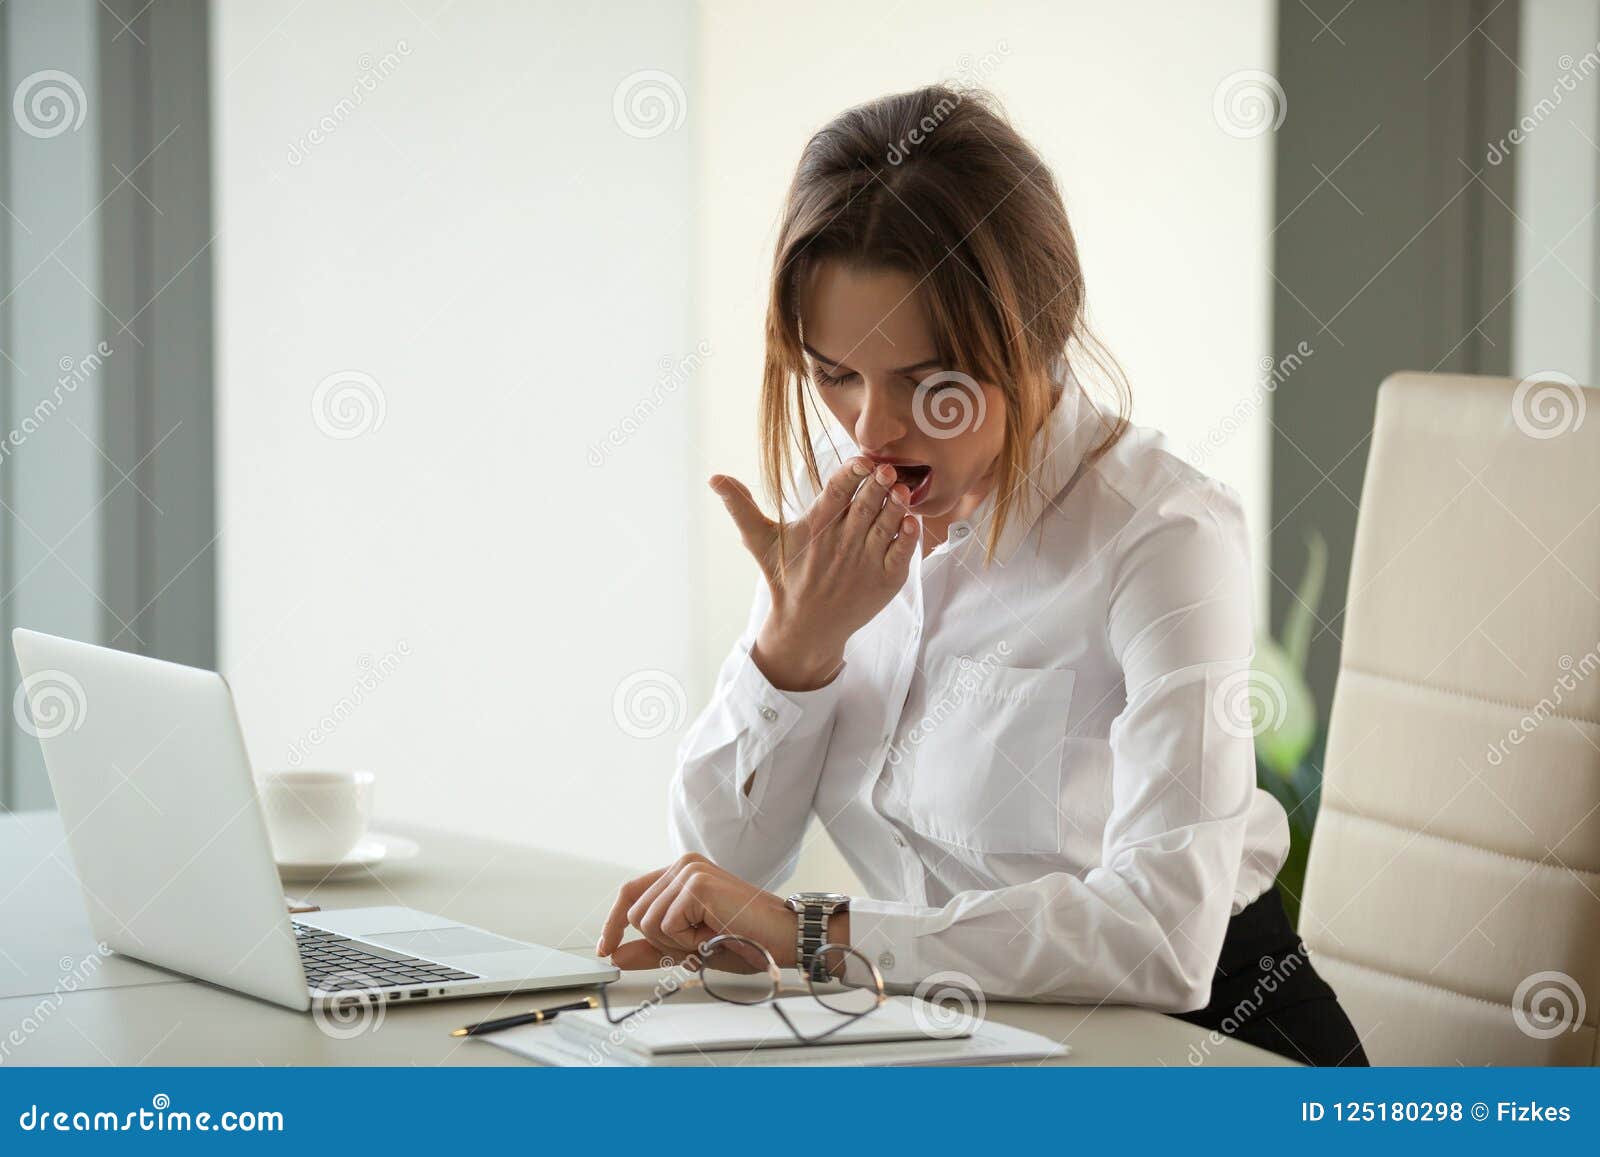 bored impatient businesswoman yawning checking time tired of ove